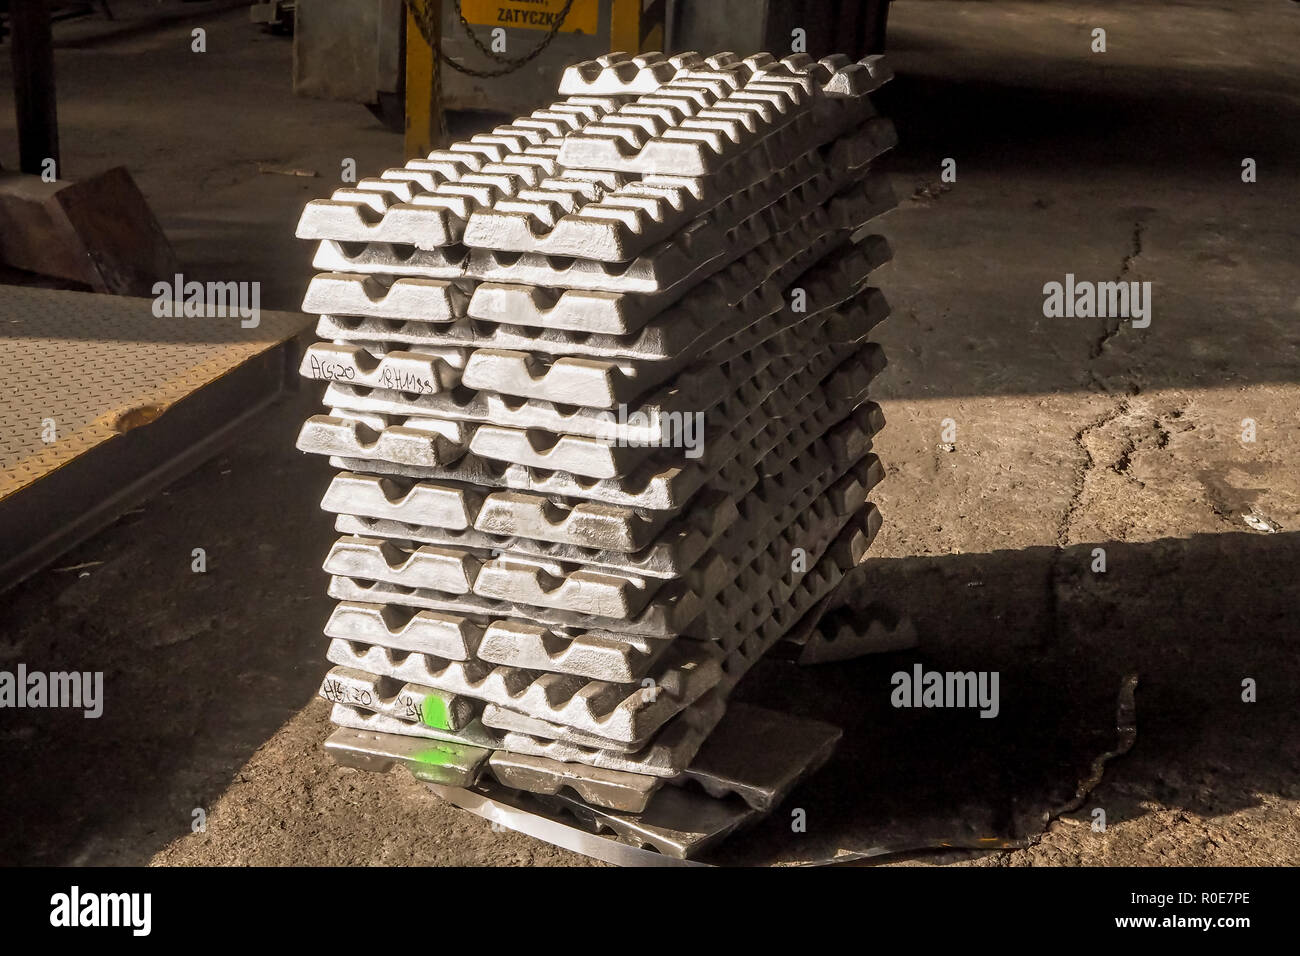 aluminum bars placed on a pallet Stock Photo